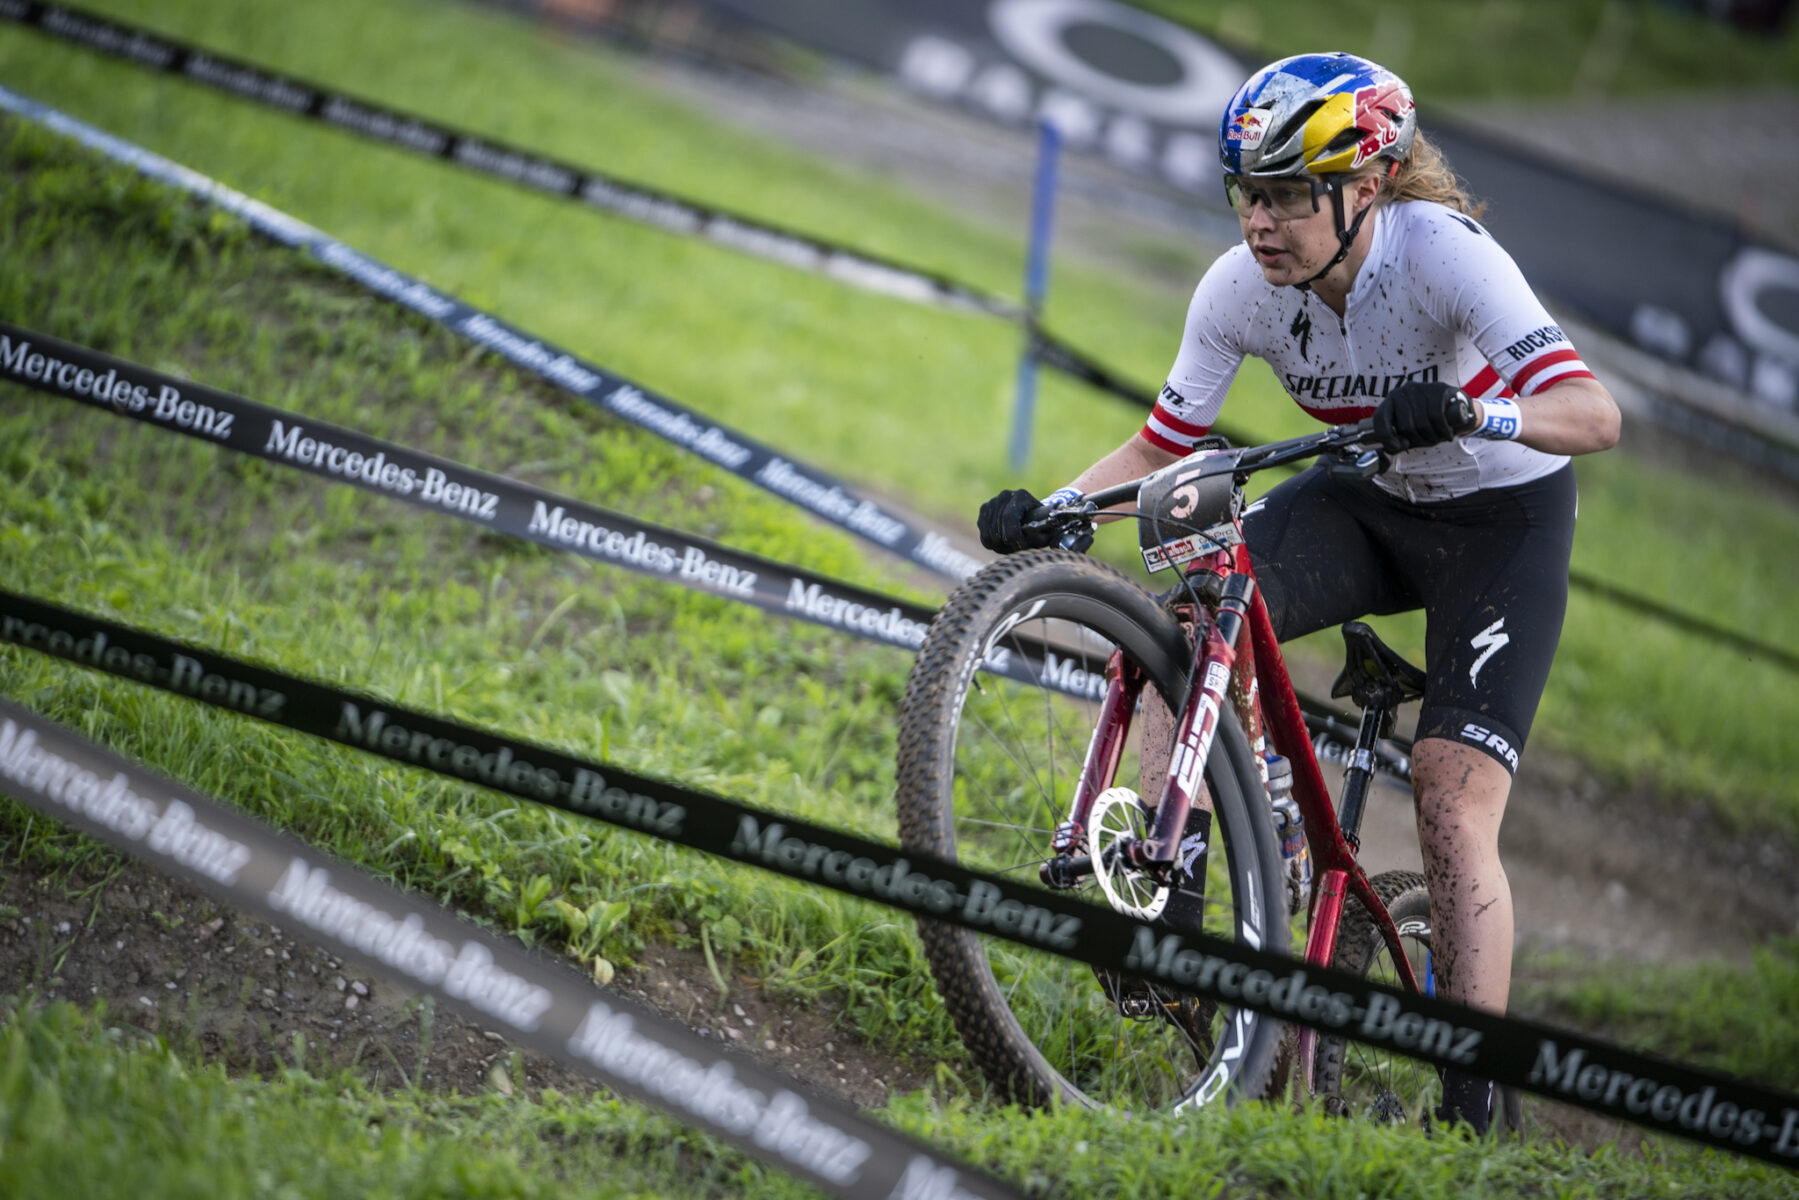 This one's for the climbers - World Cup XC Short Track at Leogang